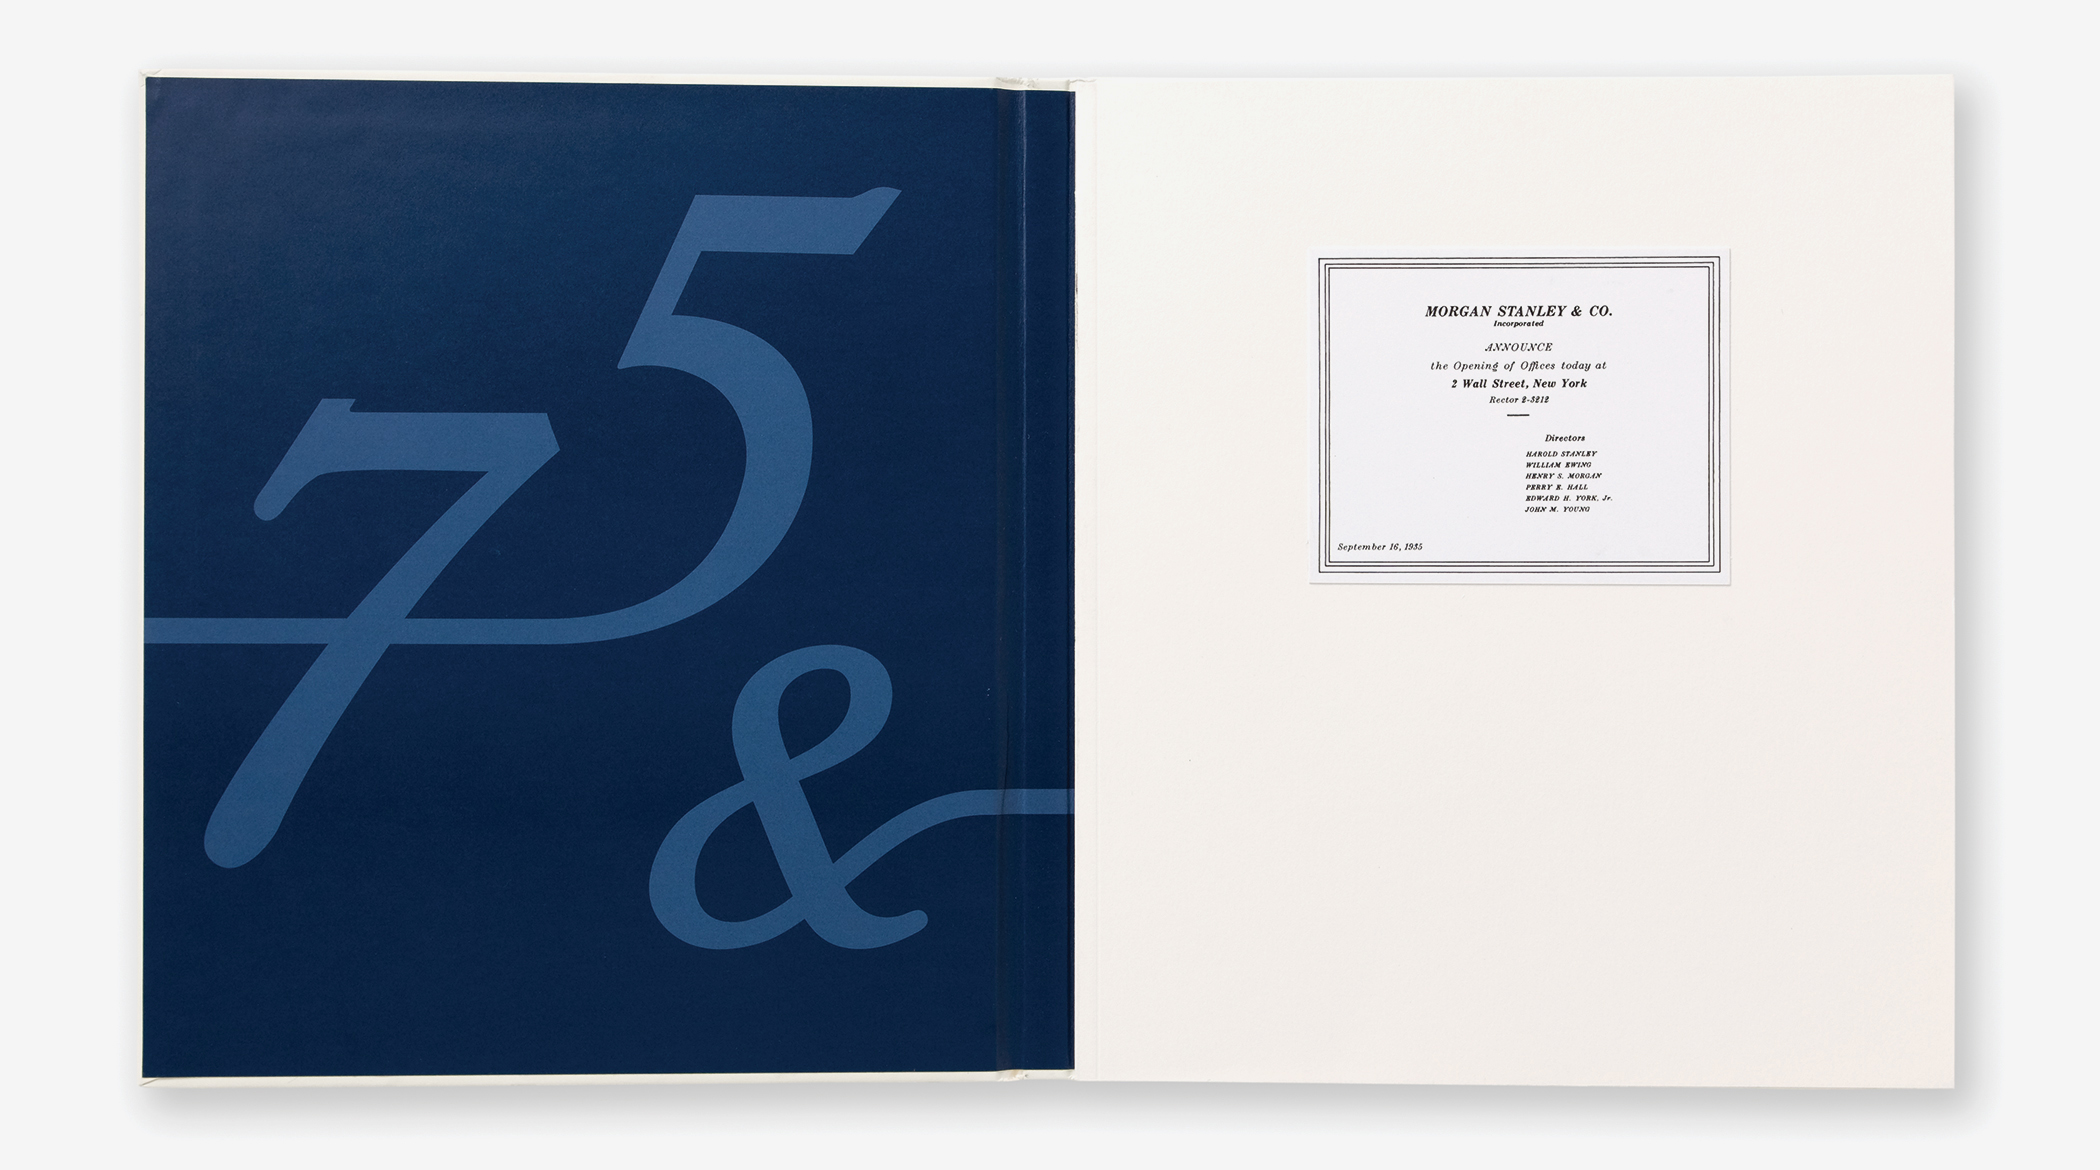 Pages from the Morgan Stanely 75th anniversary commemorative book with a reproduction of the announcement of the company's formation.